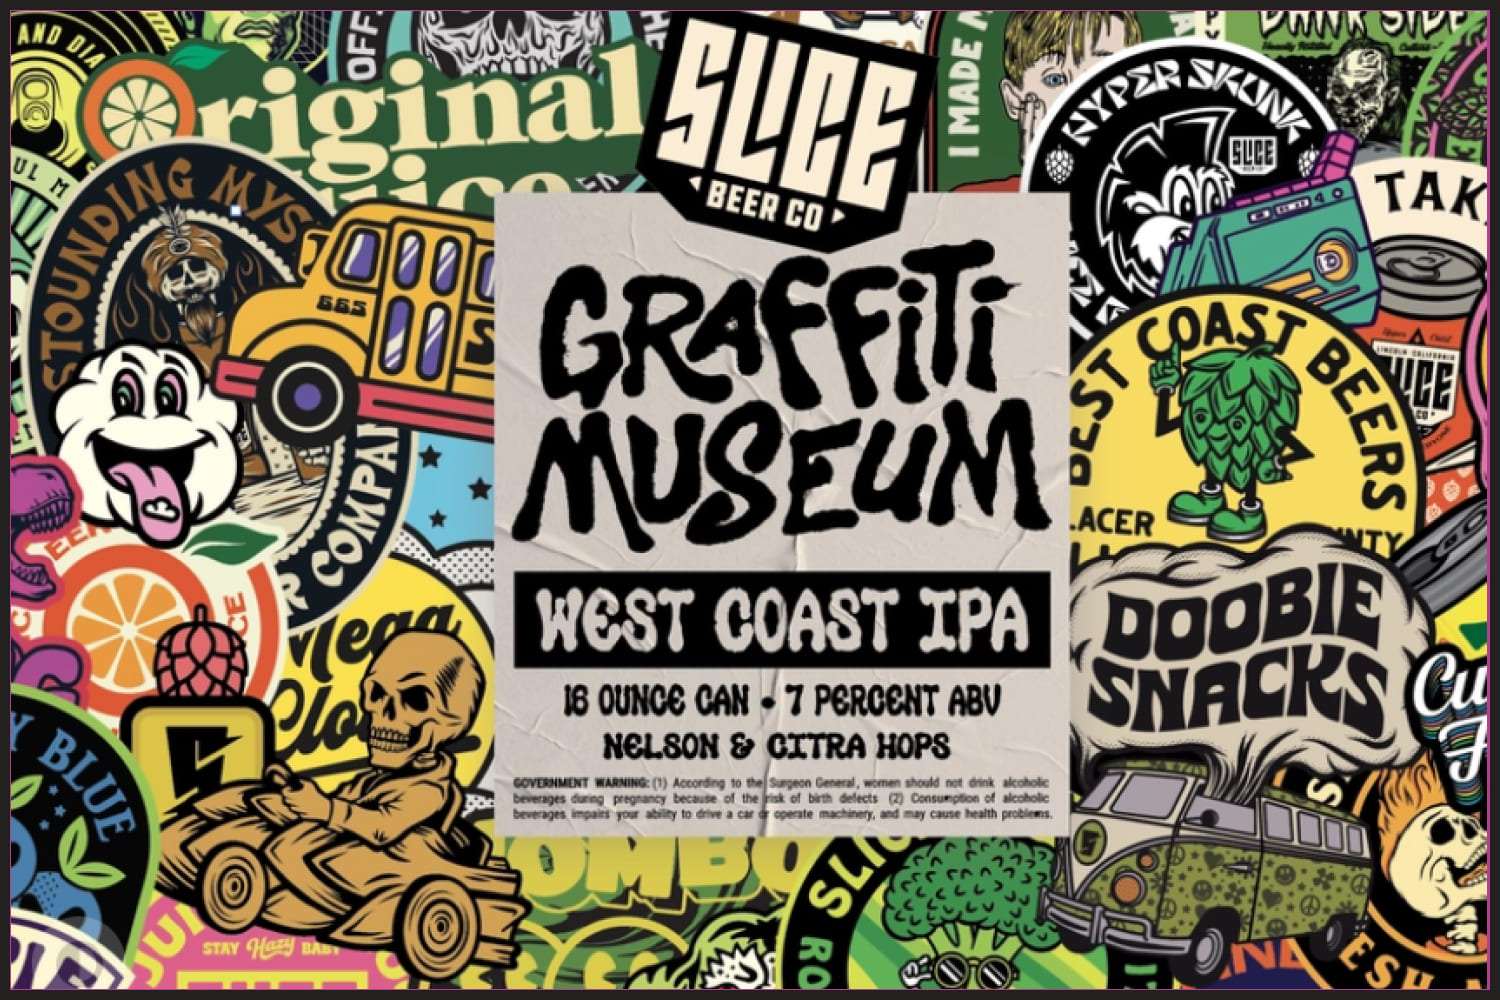 Graffiti museum poster with psychedelic pictures.